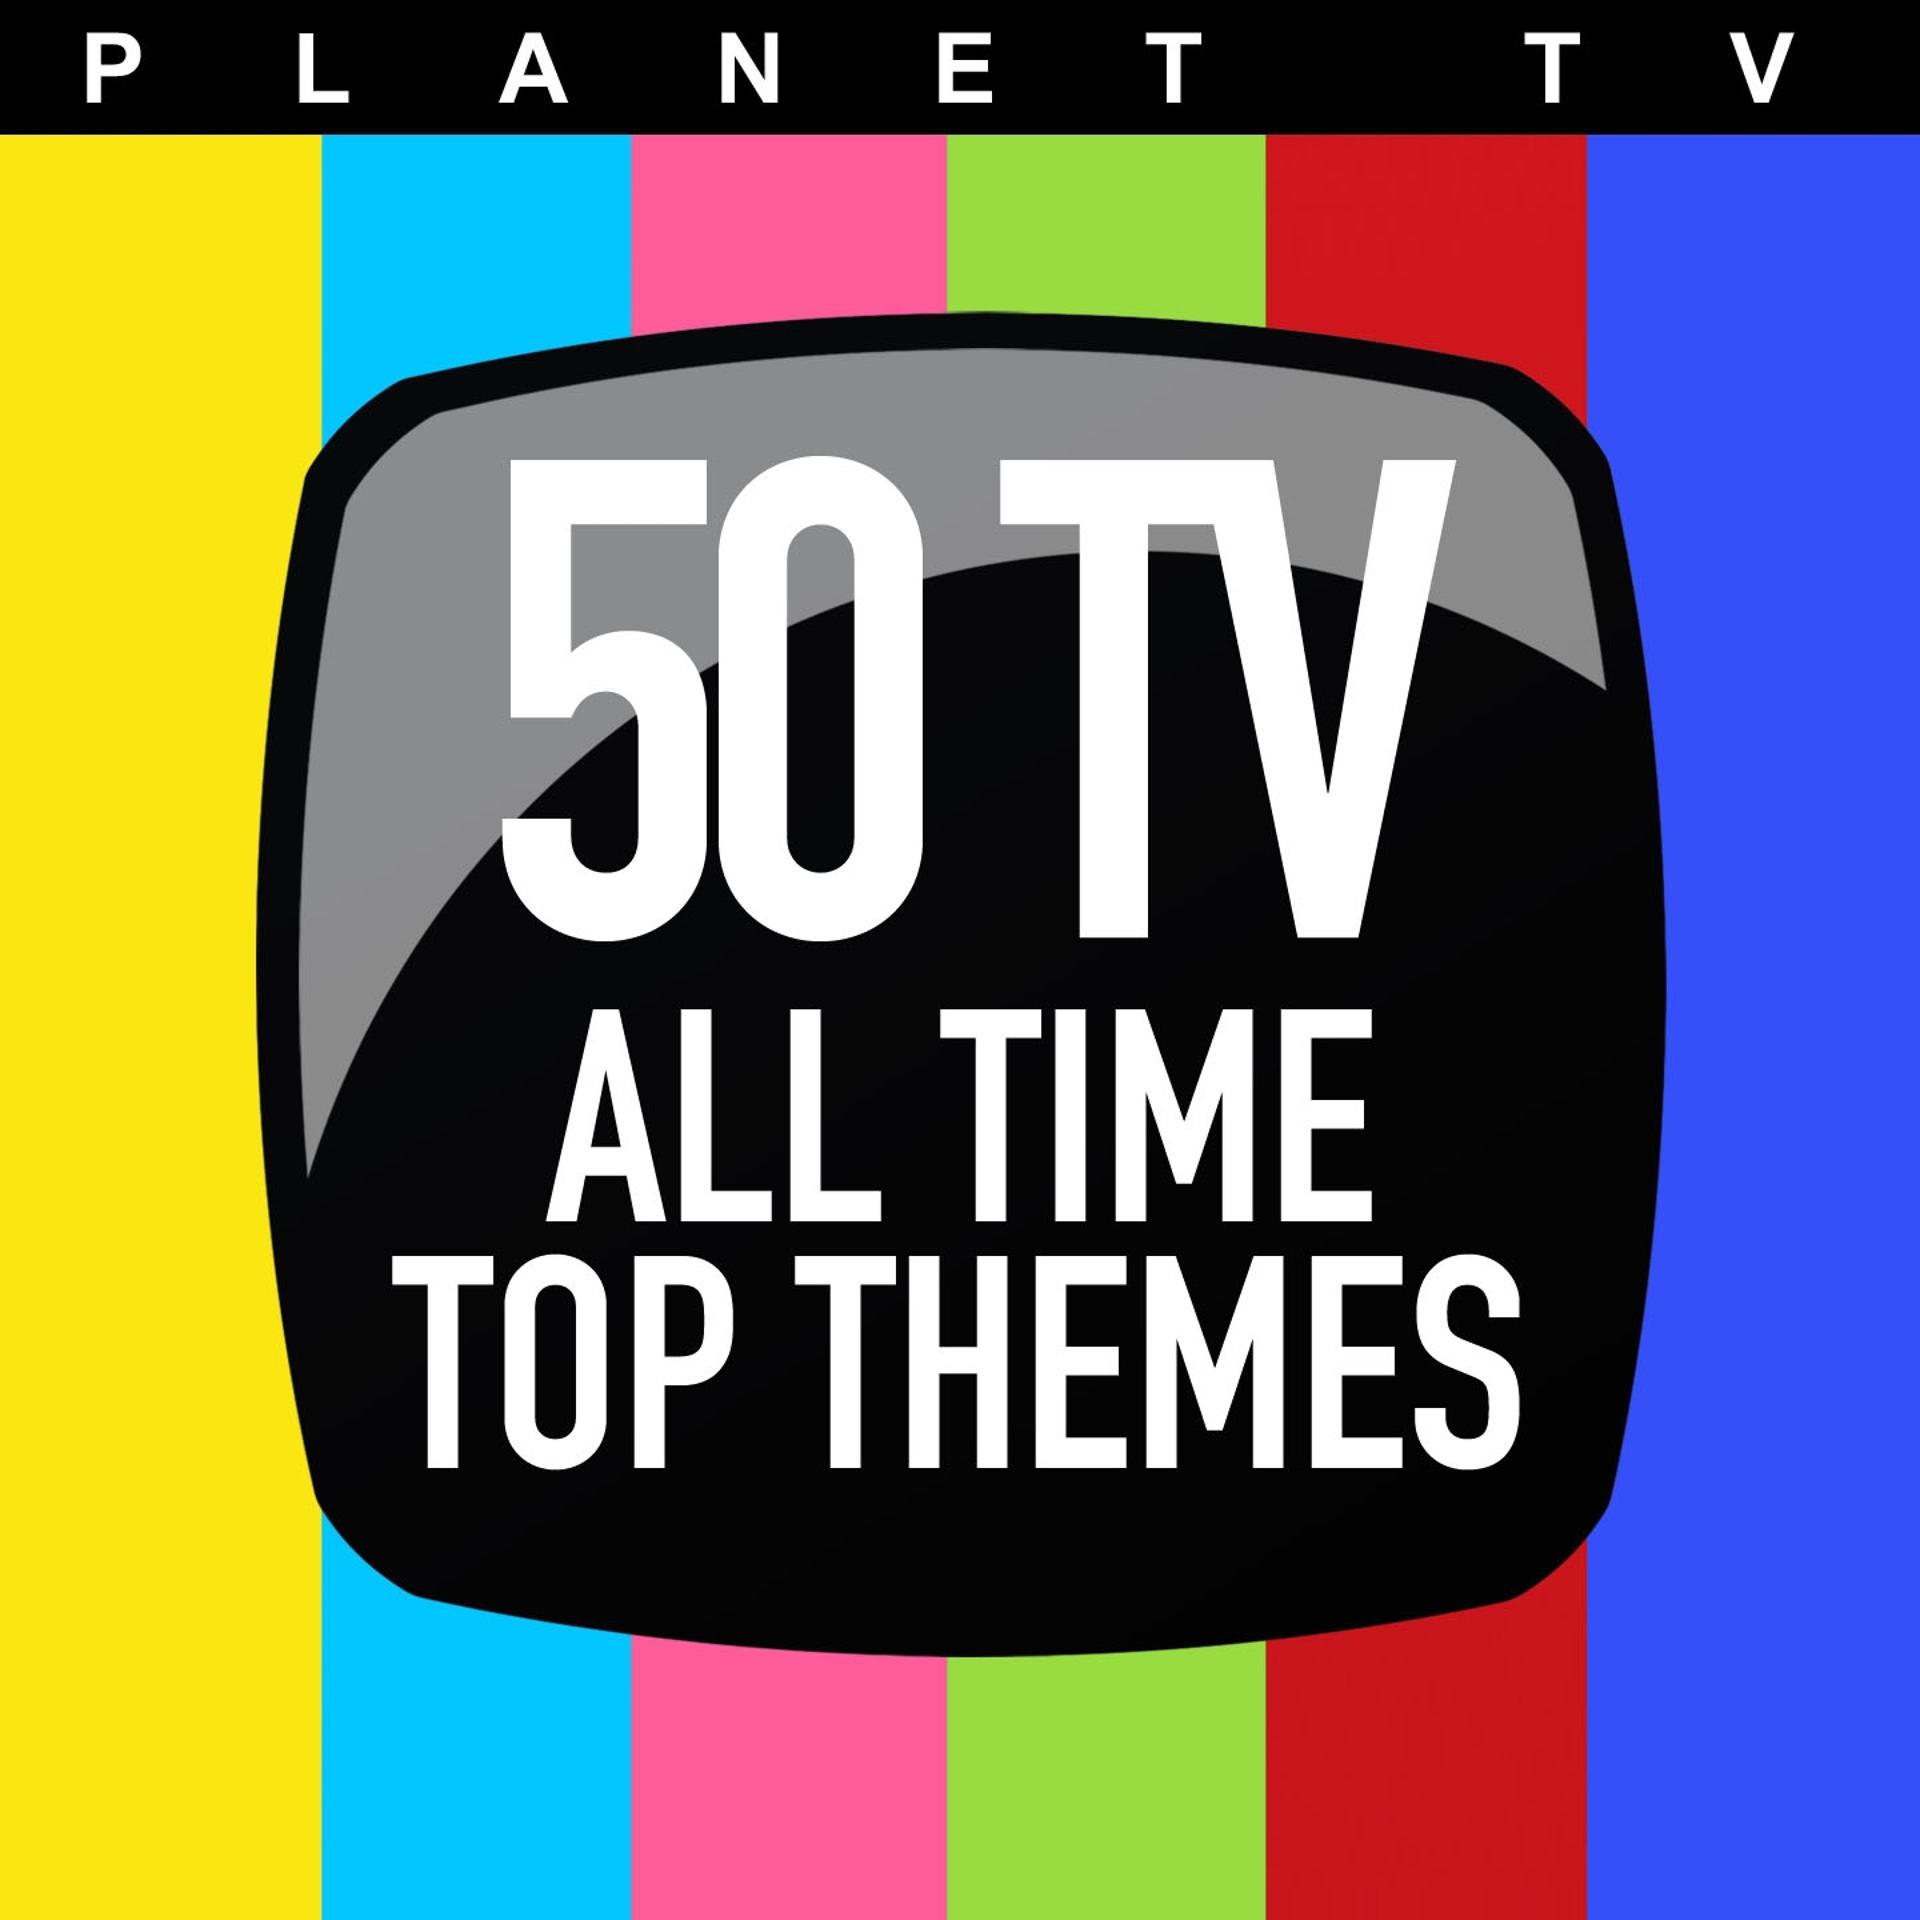 Постер альбома Planet TV: 50 TV All Time Top Themes